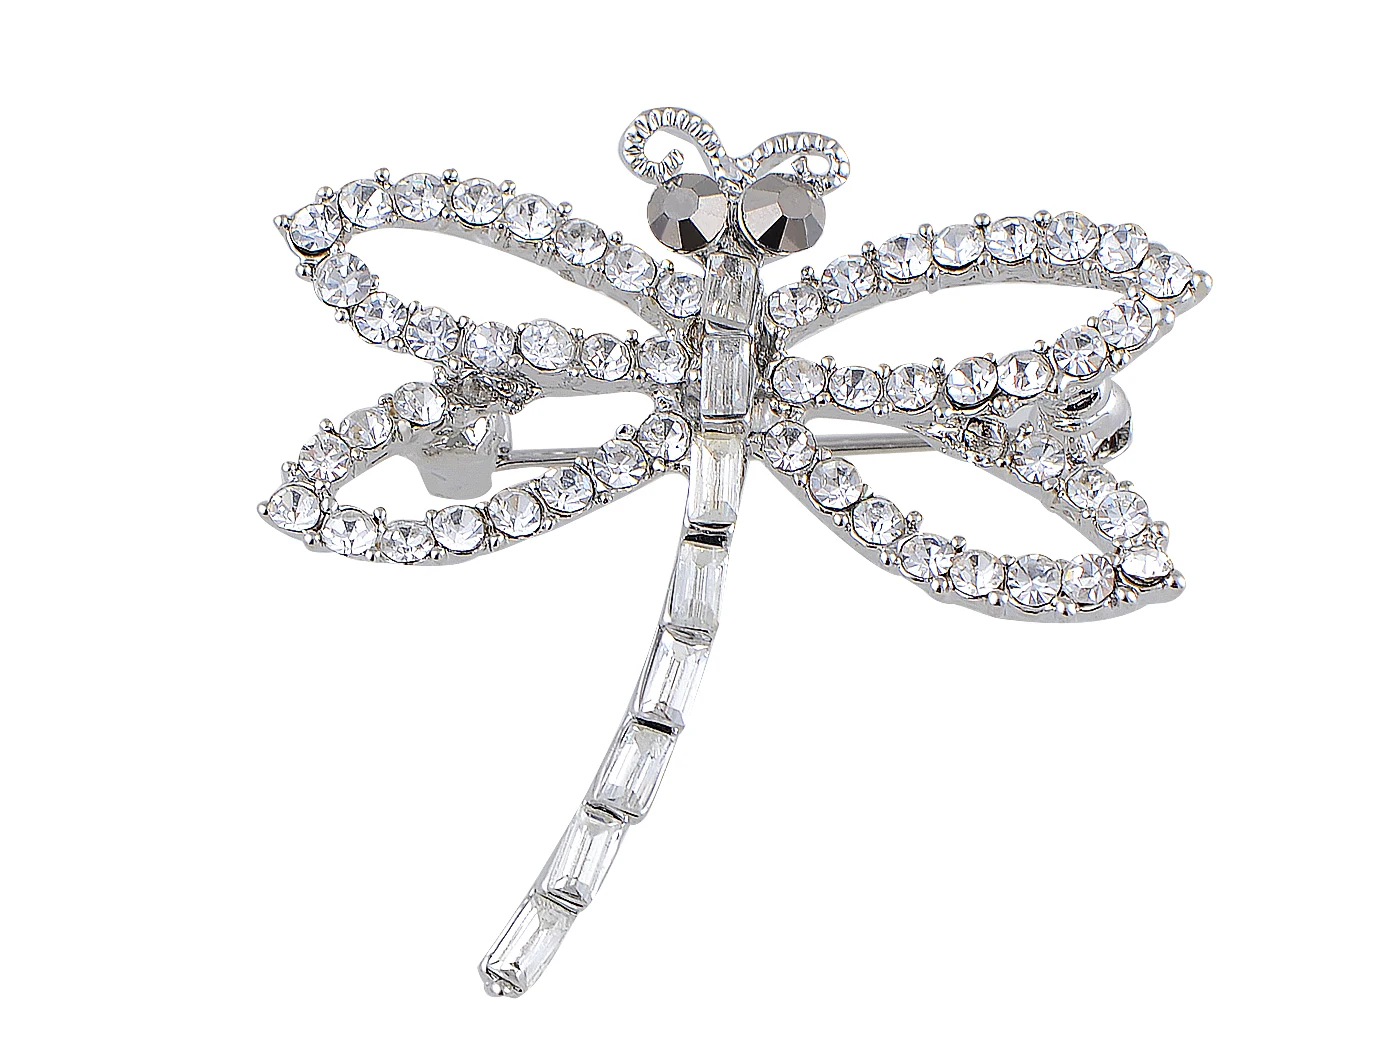 

Silvery Tone Sparkly Clear Crystal Rhinestones Dainty Dragonfly Brooch Pin For Women Gifts